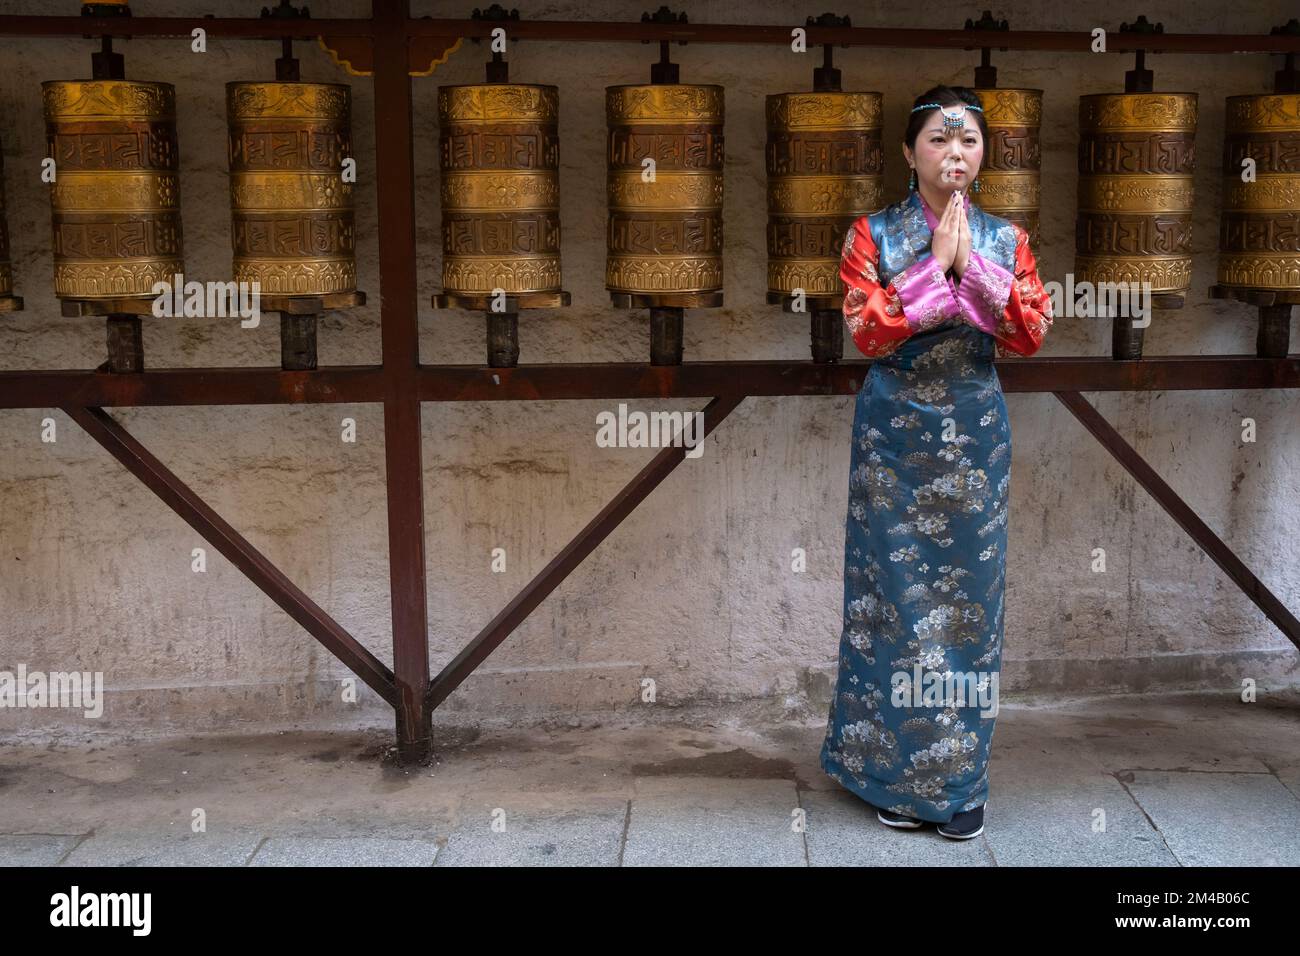 A Chinese tourist poses for a photo wearing traditional Tibetan clothing in front of prayer wheels. Lhasa. Tibet Autonomous Region. China. Stock Photo